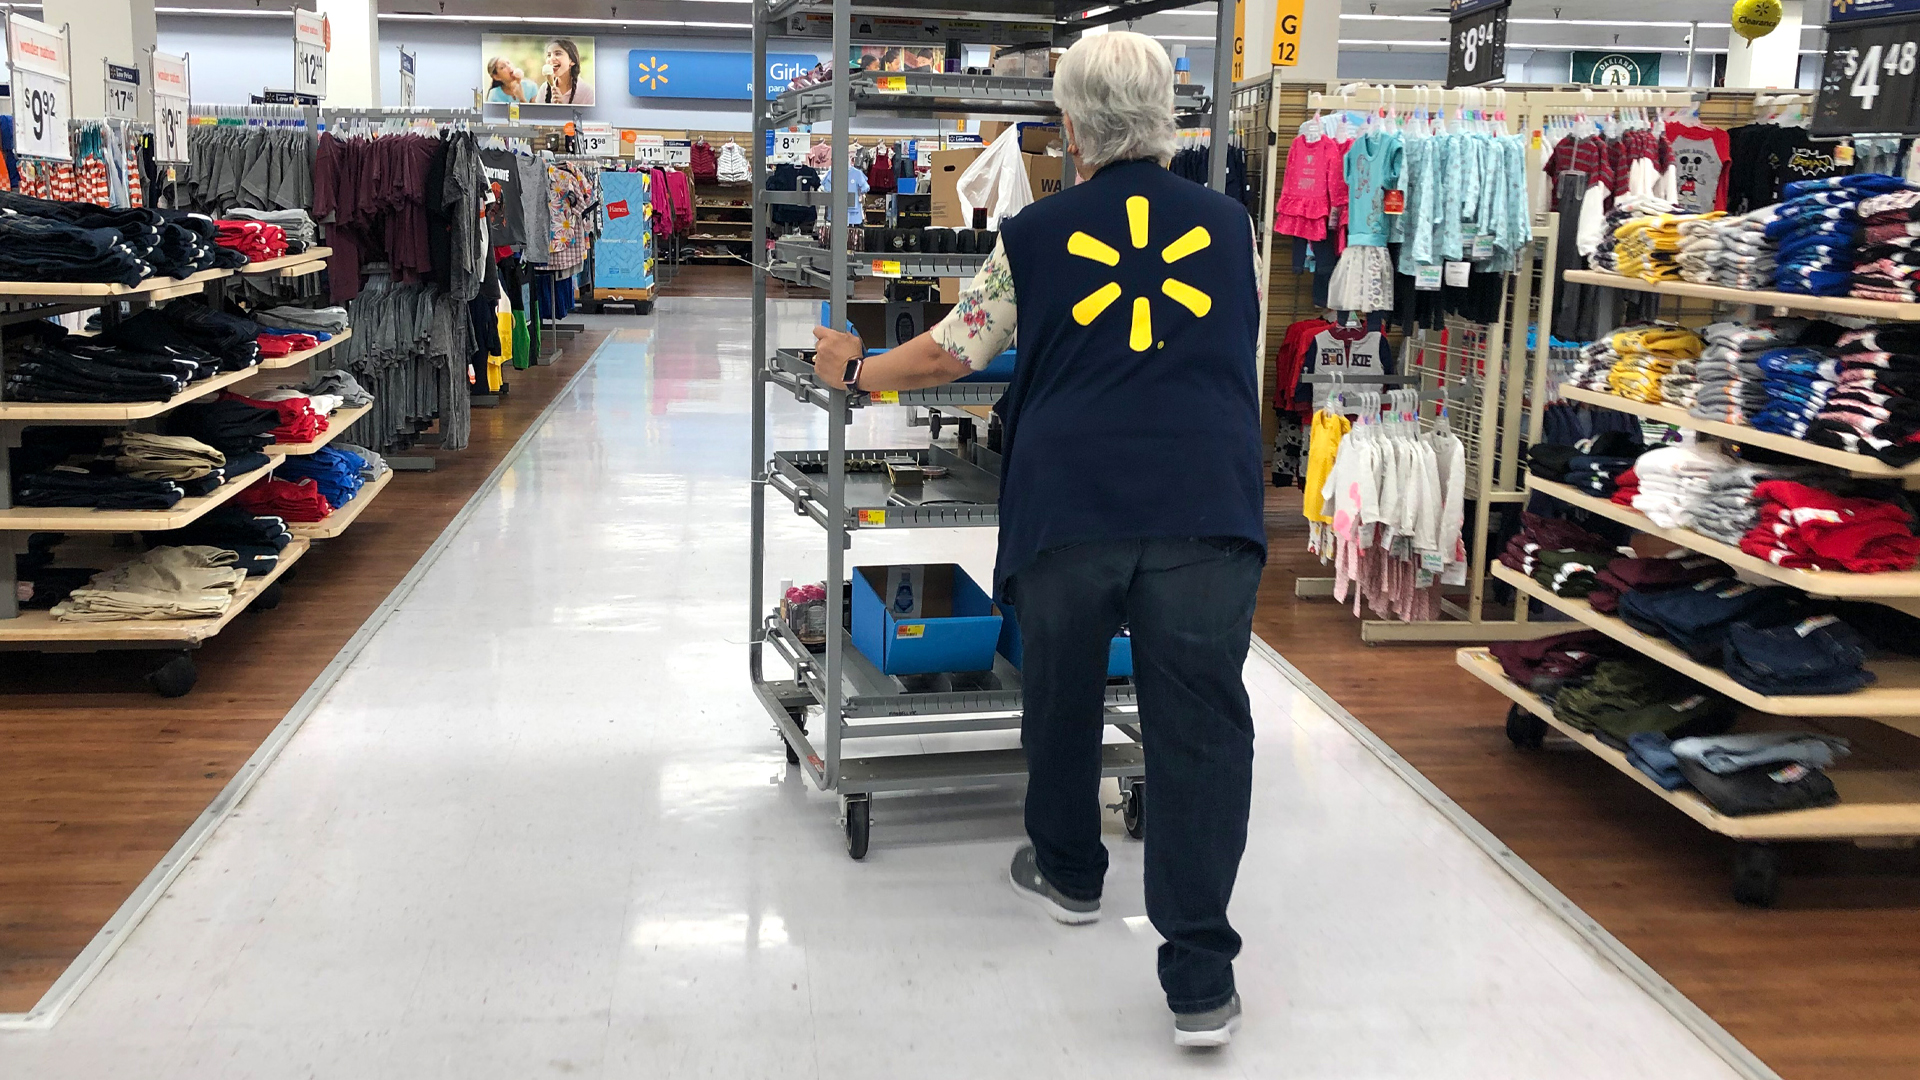 ‘It can be a secret weapon,’ says Walmart employee of little-known trick that saves hundreds, it ‘just takes asking’ [Video]